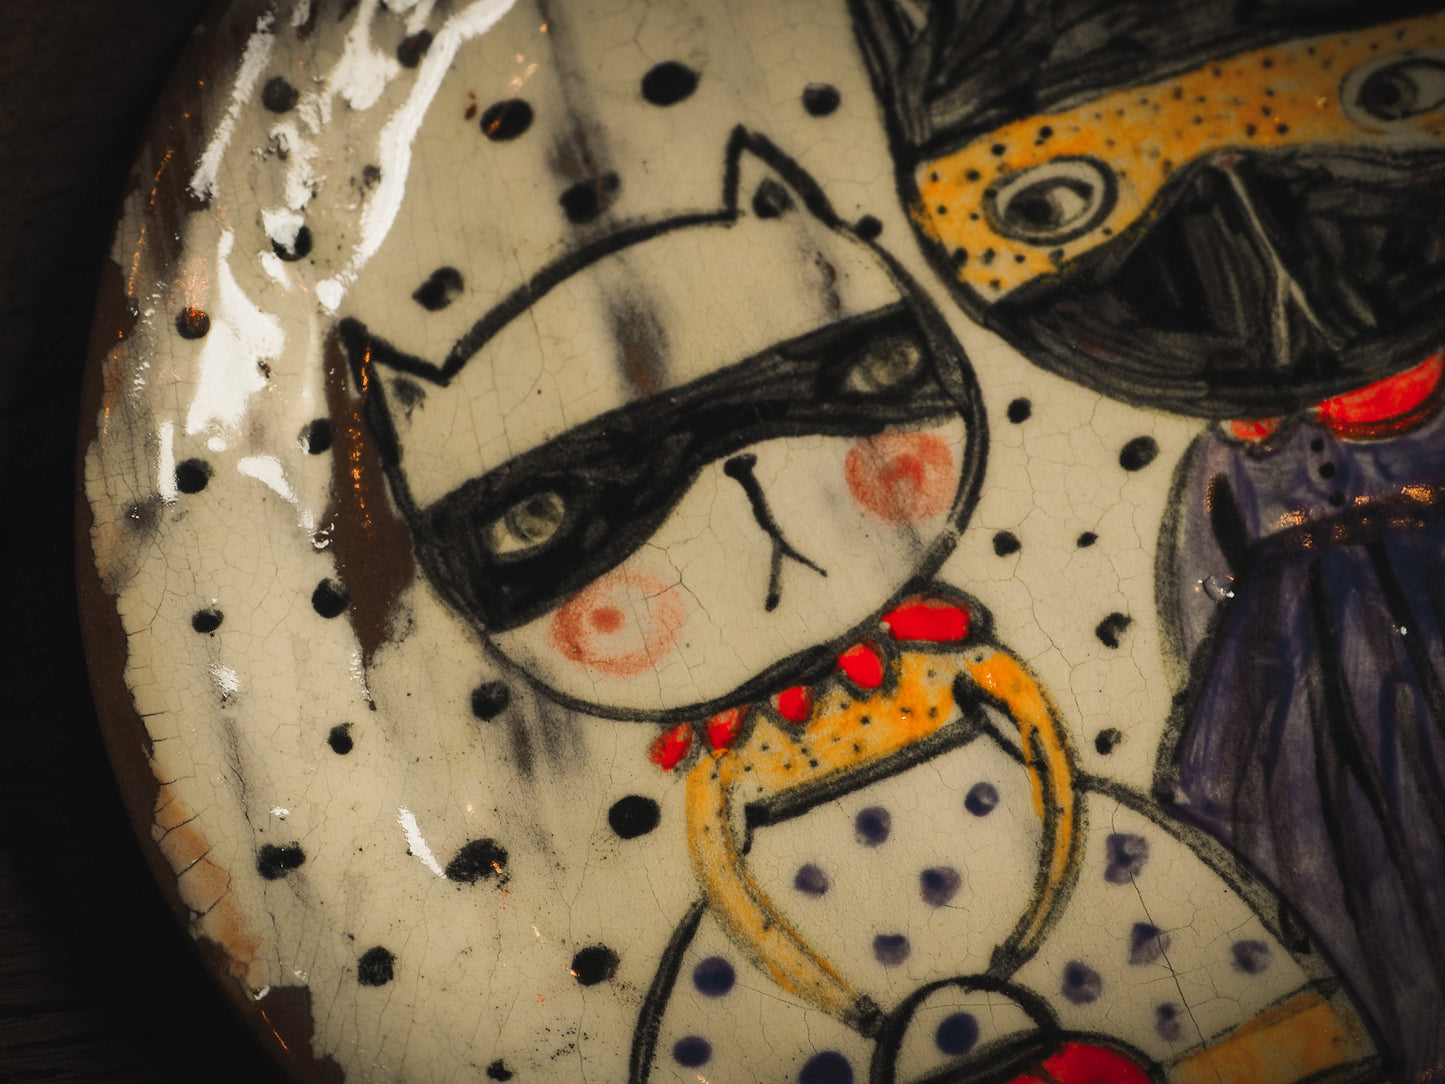 An original handmade Halloween ceramic dinner plate by Idania Salcido, Danita Art. Each plate is hand painted and glazed with pumpkins, witches, cats, jack-o-lanterns and moons. Made with fired glazed ceramics, this little witch, jack-o-lantern and cat plate is painted with delicate patterns that make it one of a kind artwork.